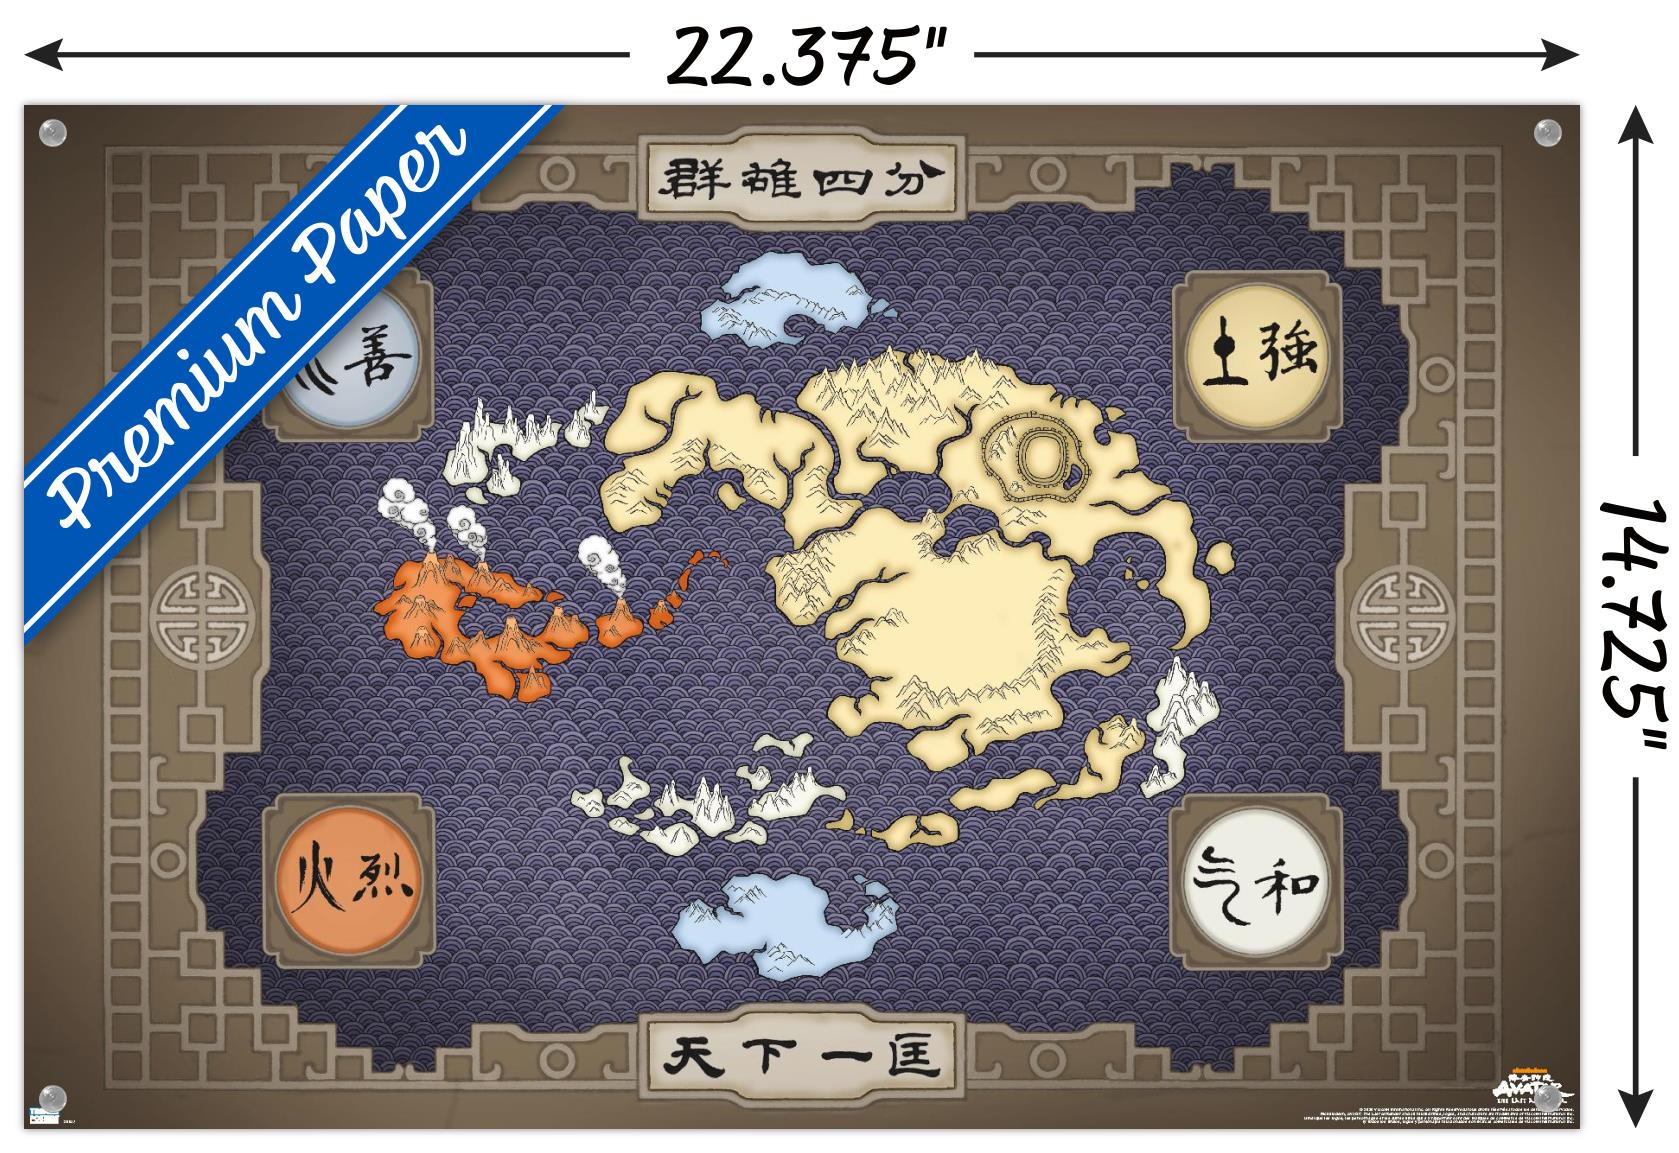 Avatar - Map Wall Poster with Pushpins, 14.725" x 22.375" - image 3 of 6